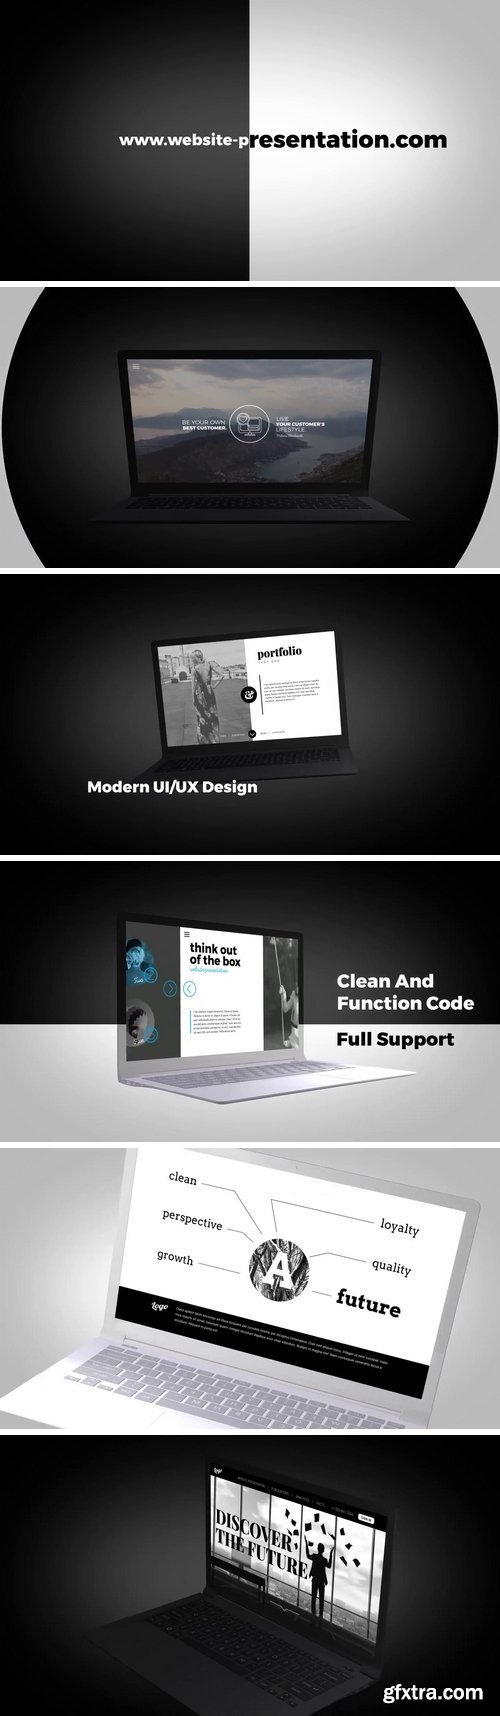 MA - Dynamic Website Presentation After Effects Templates 67077